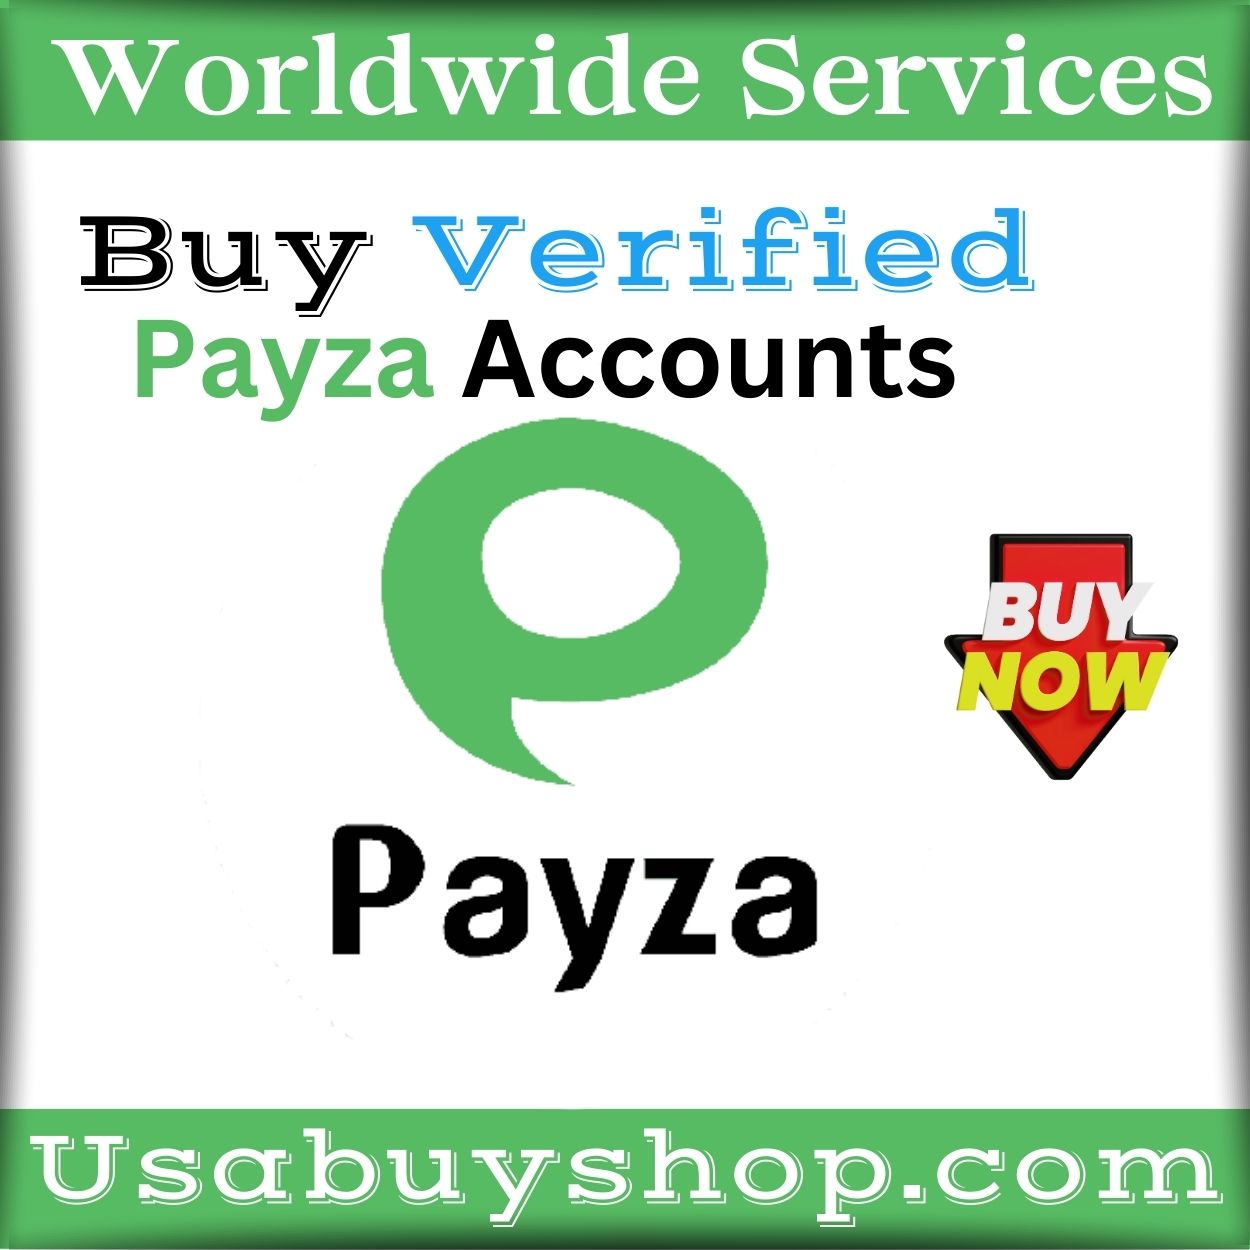 : Buy Verified Payza Accounts - 100% Verified Fast and Reliable